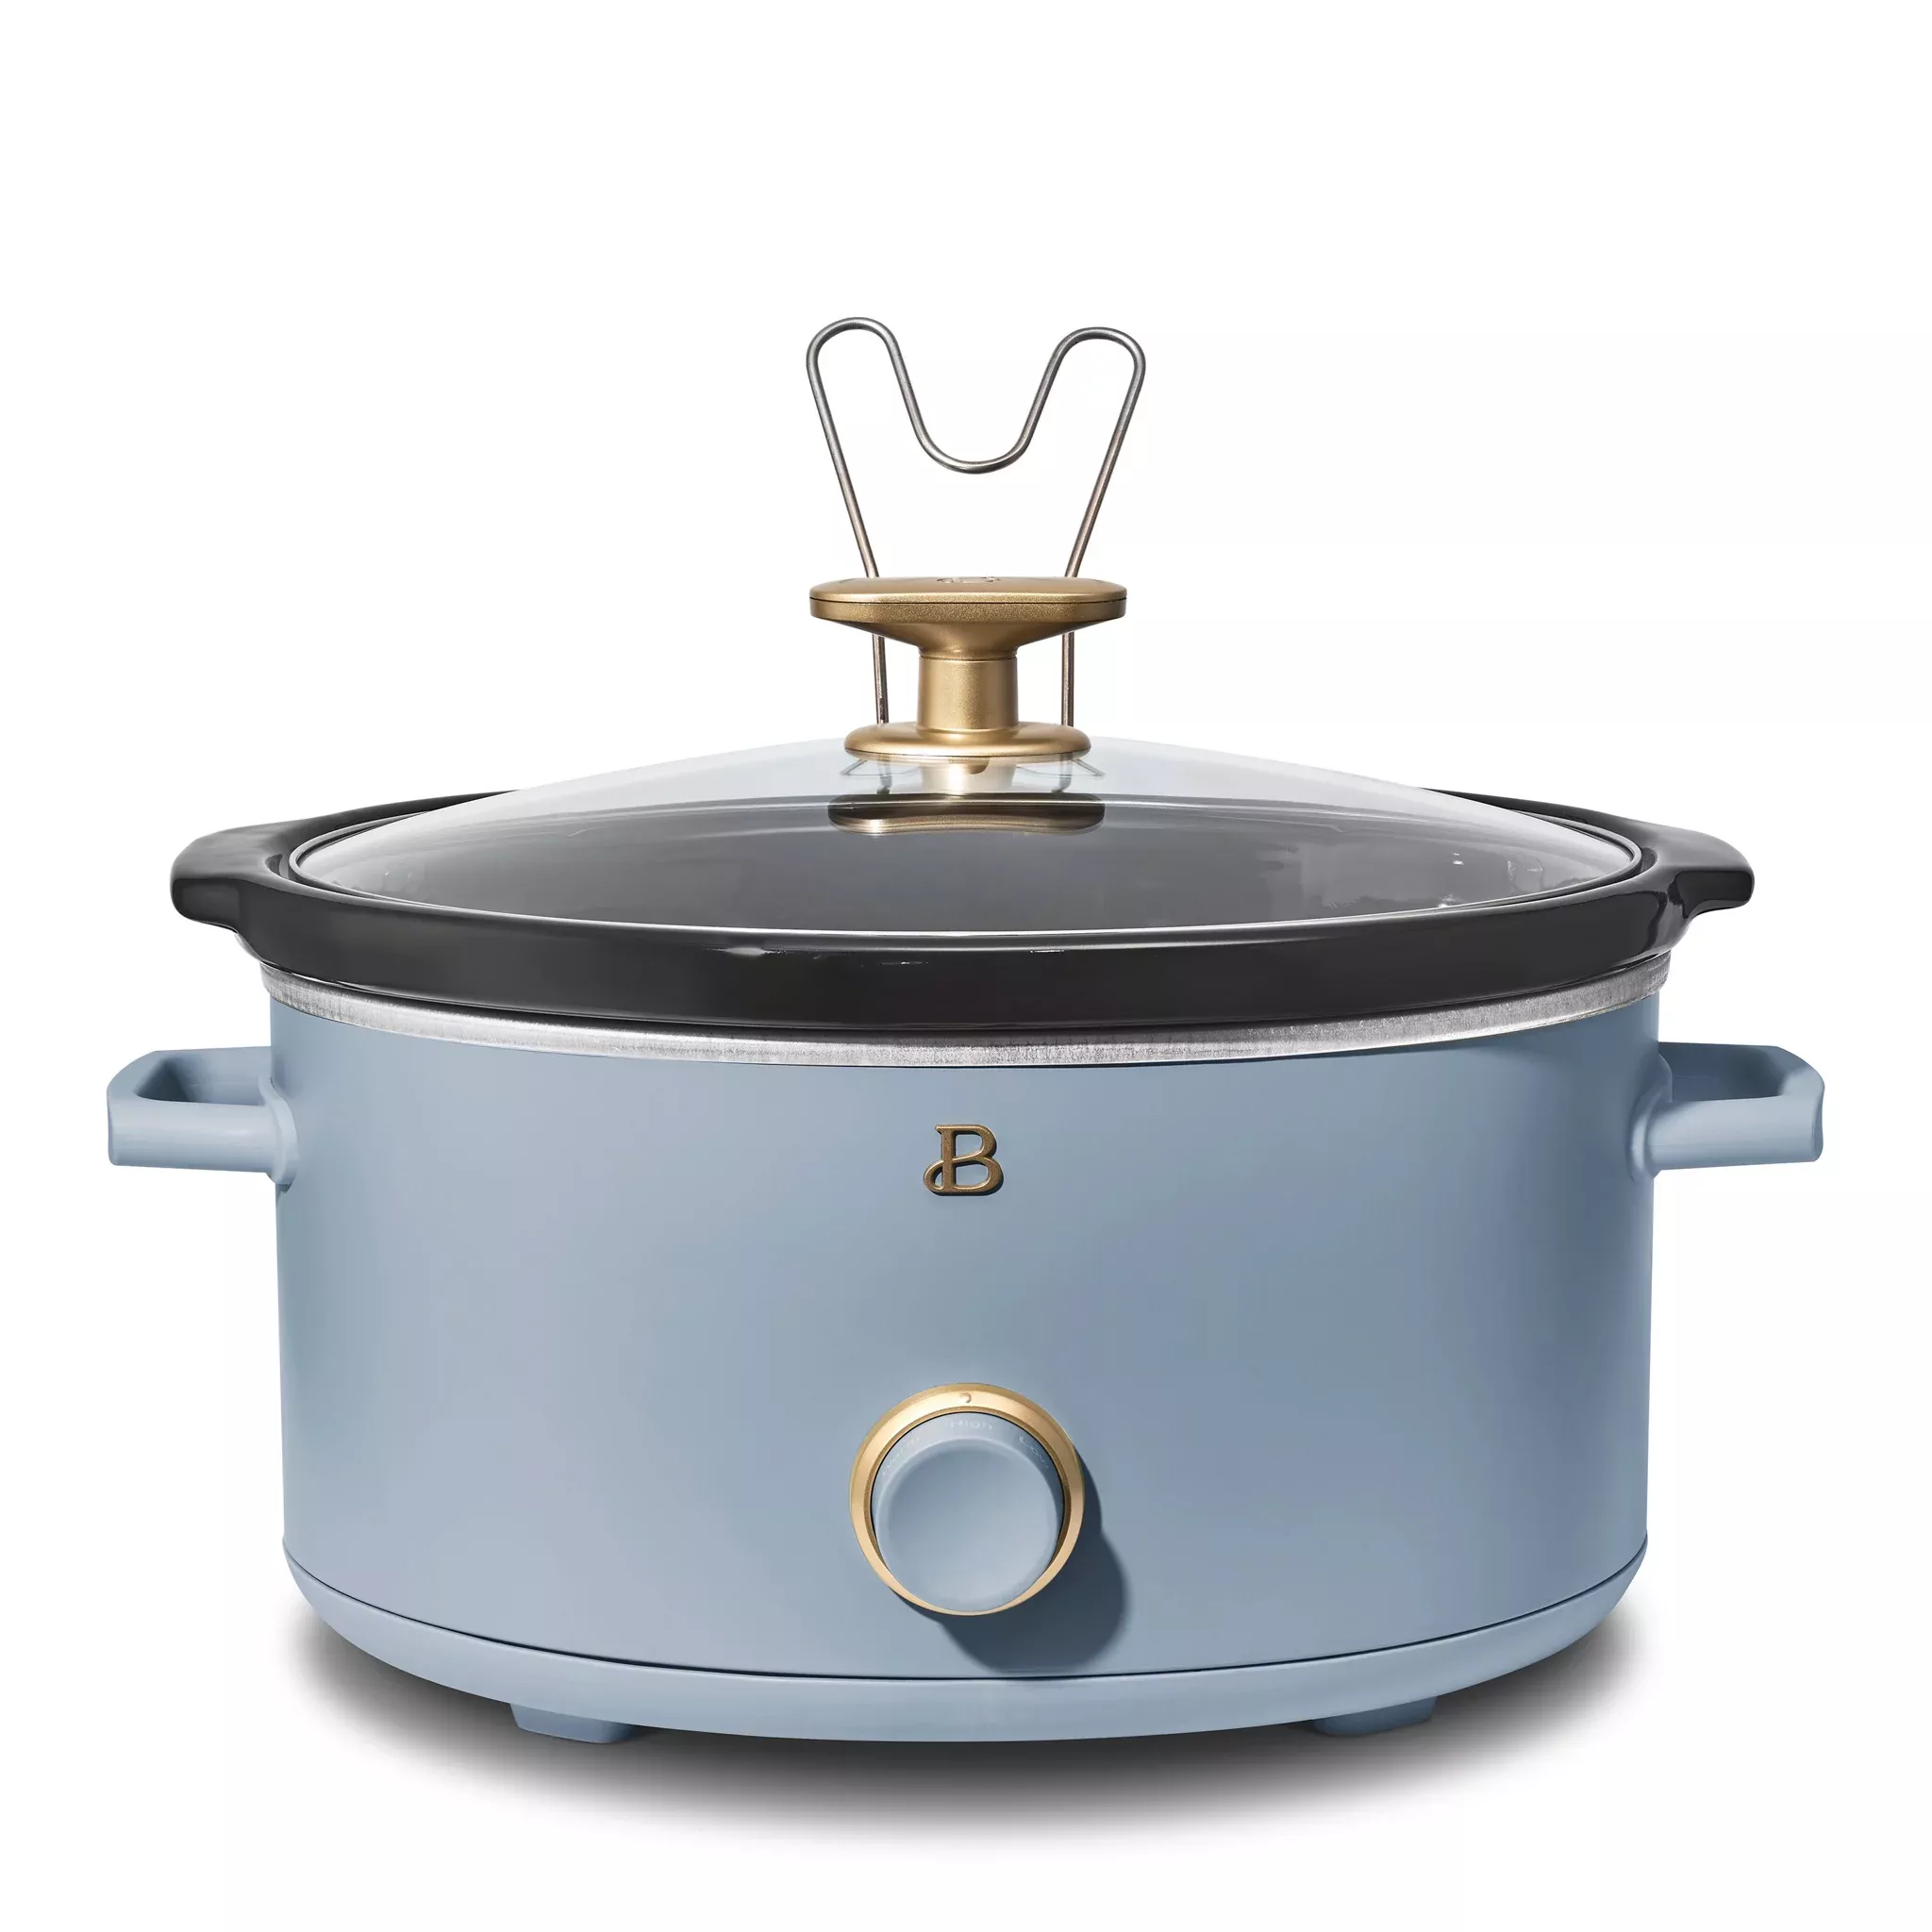 Beautiful 8QT Slow Cooker, Sage Green by Drew Barrymore 